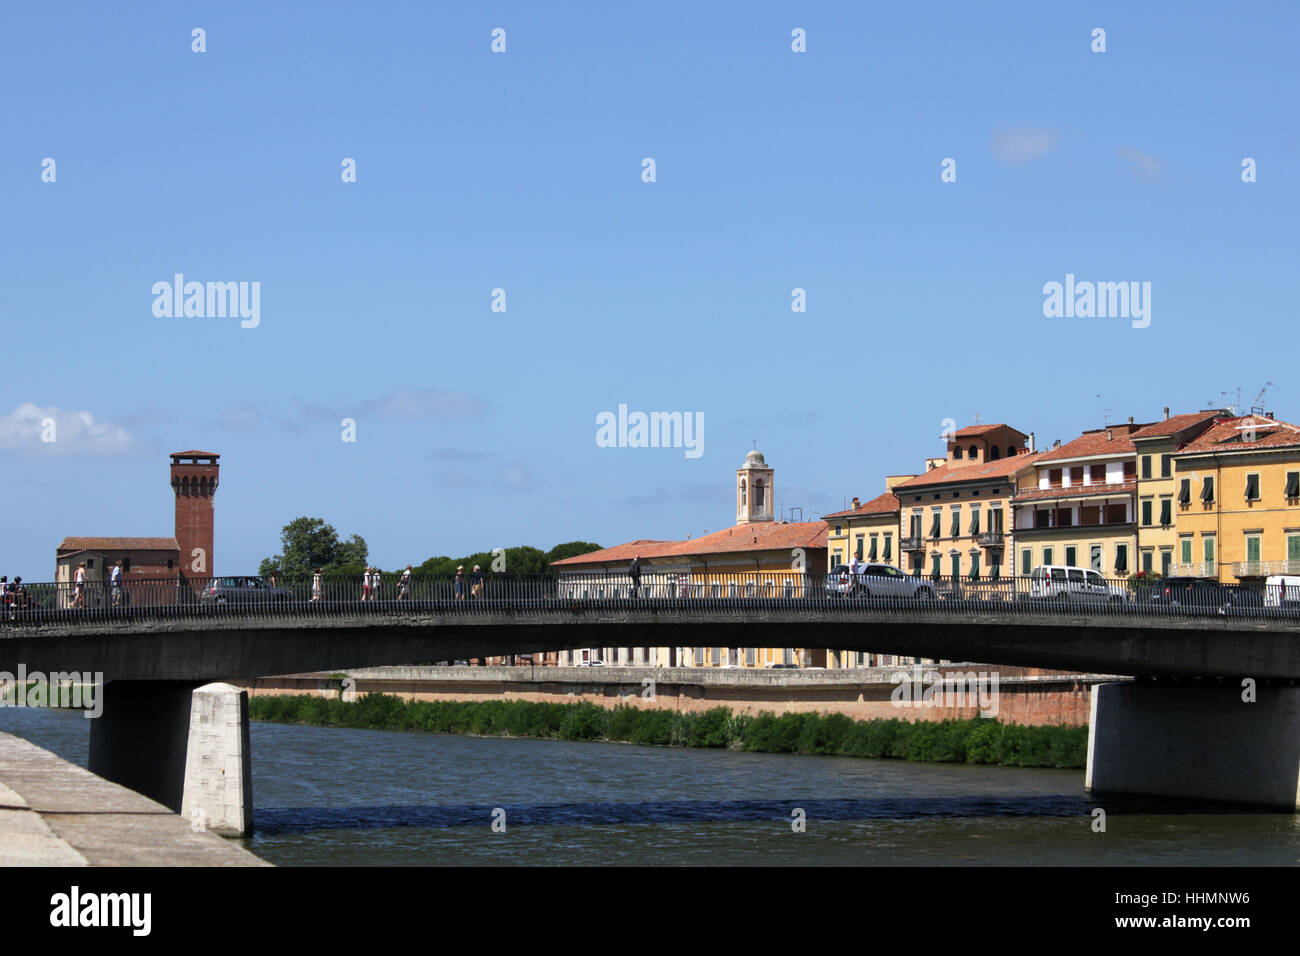 bridge, river, water, chateau, castle, tower, historical, houses, church, city, Stock Photo